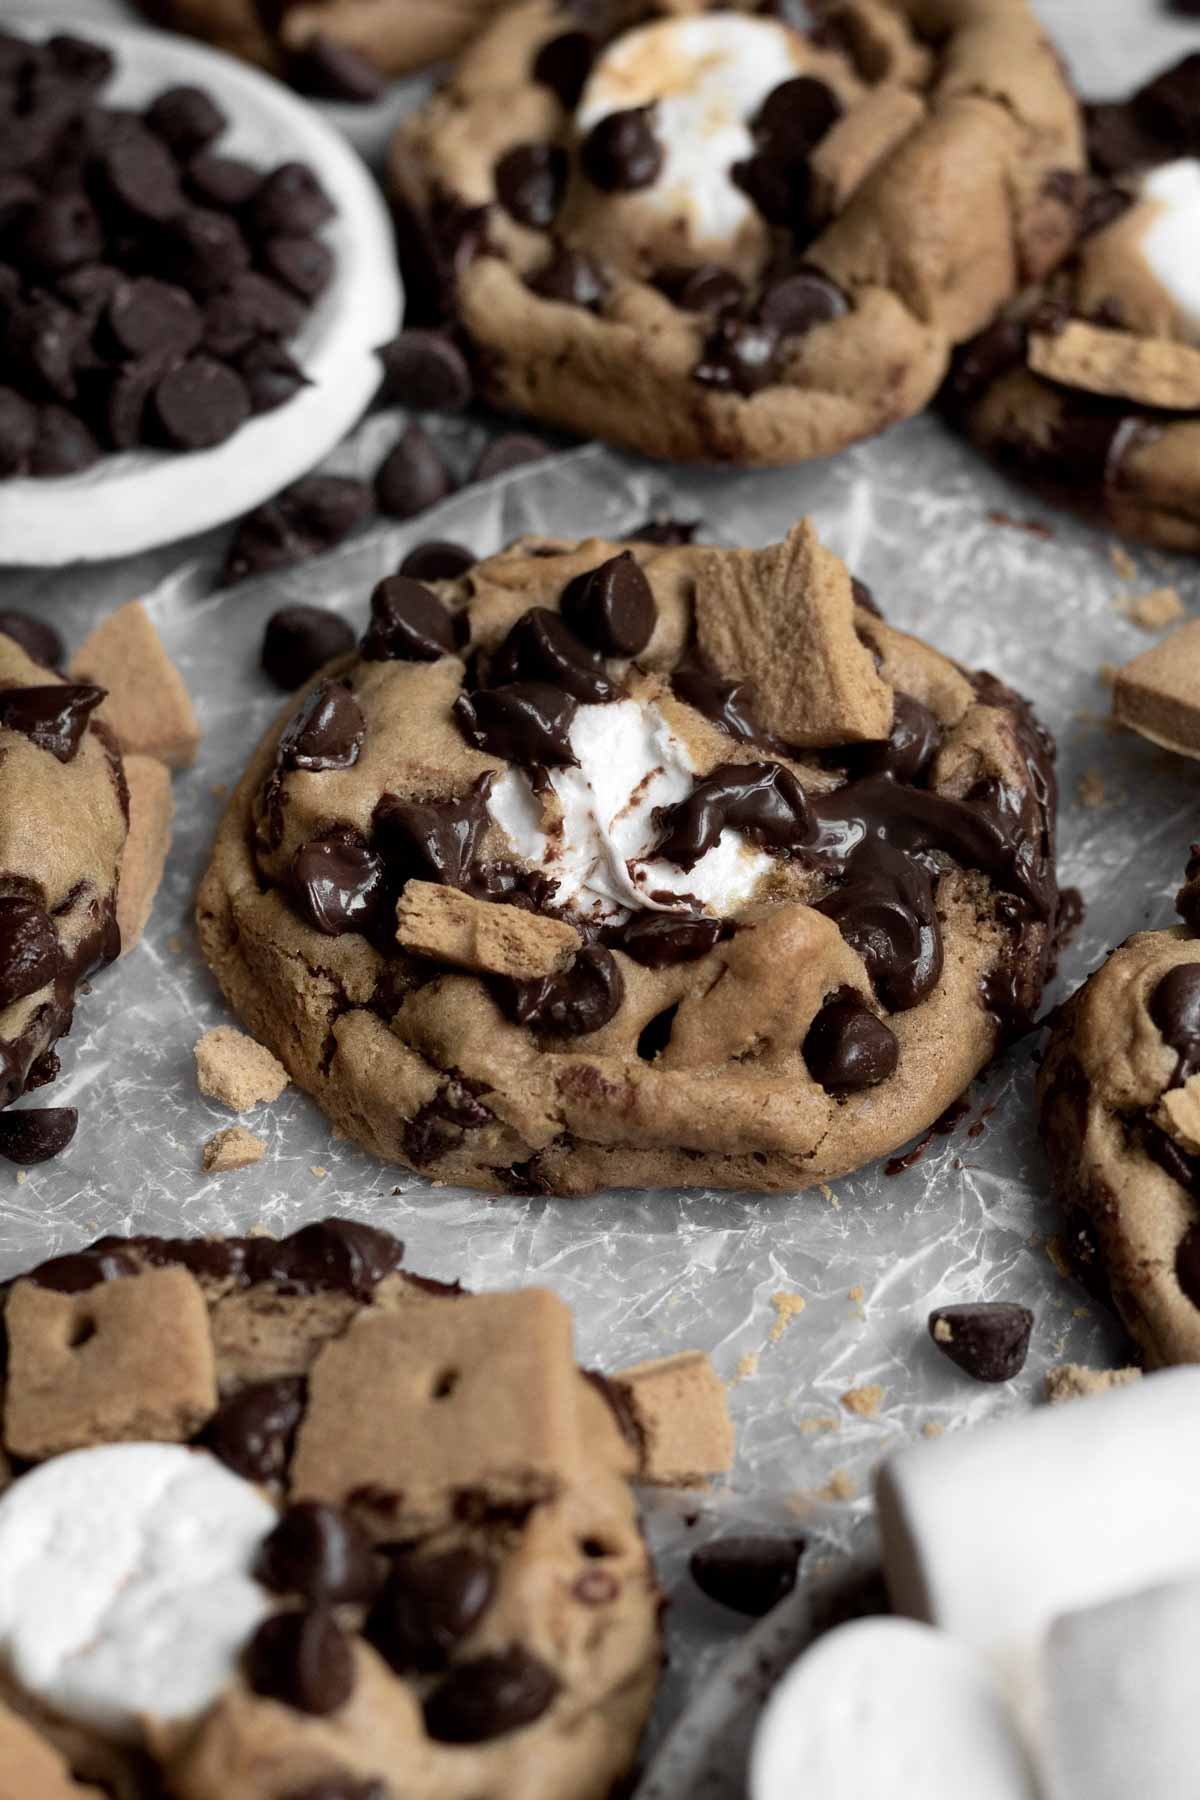 A whole cookie with a warm marshmallow center.